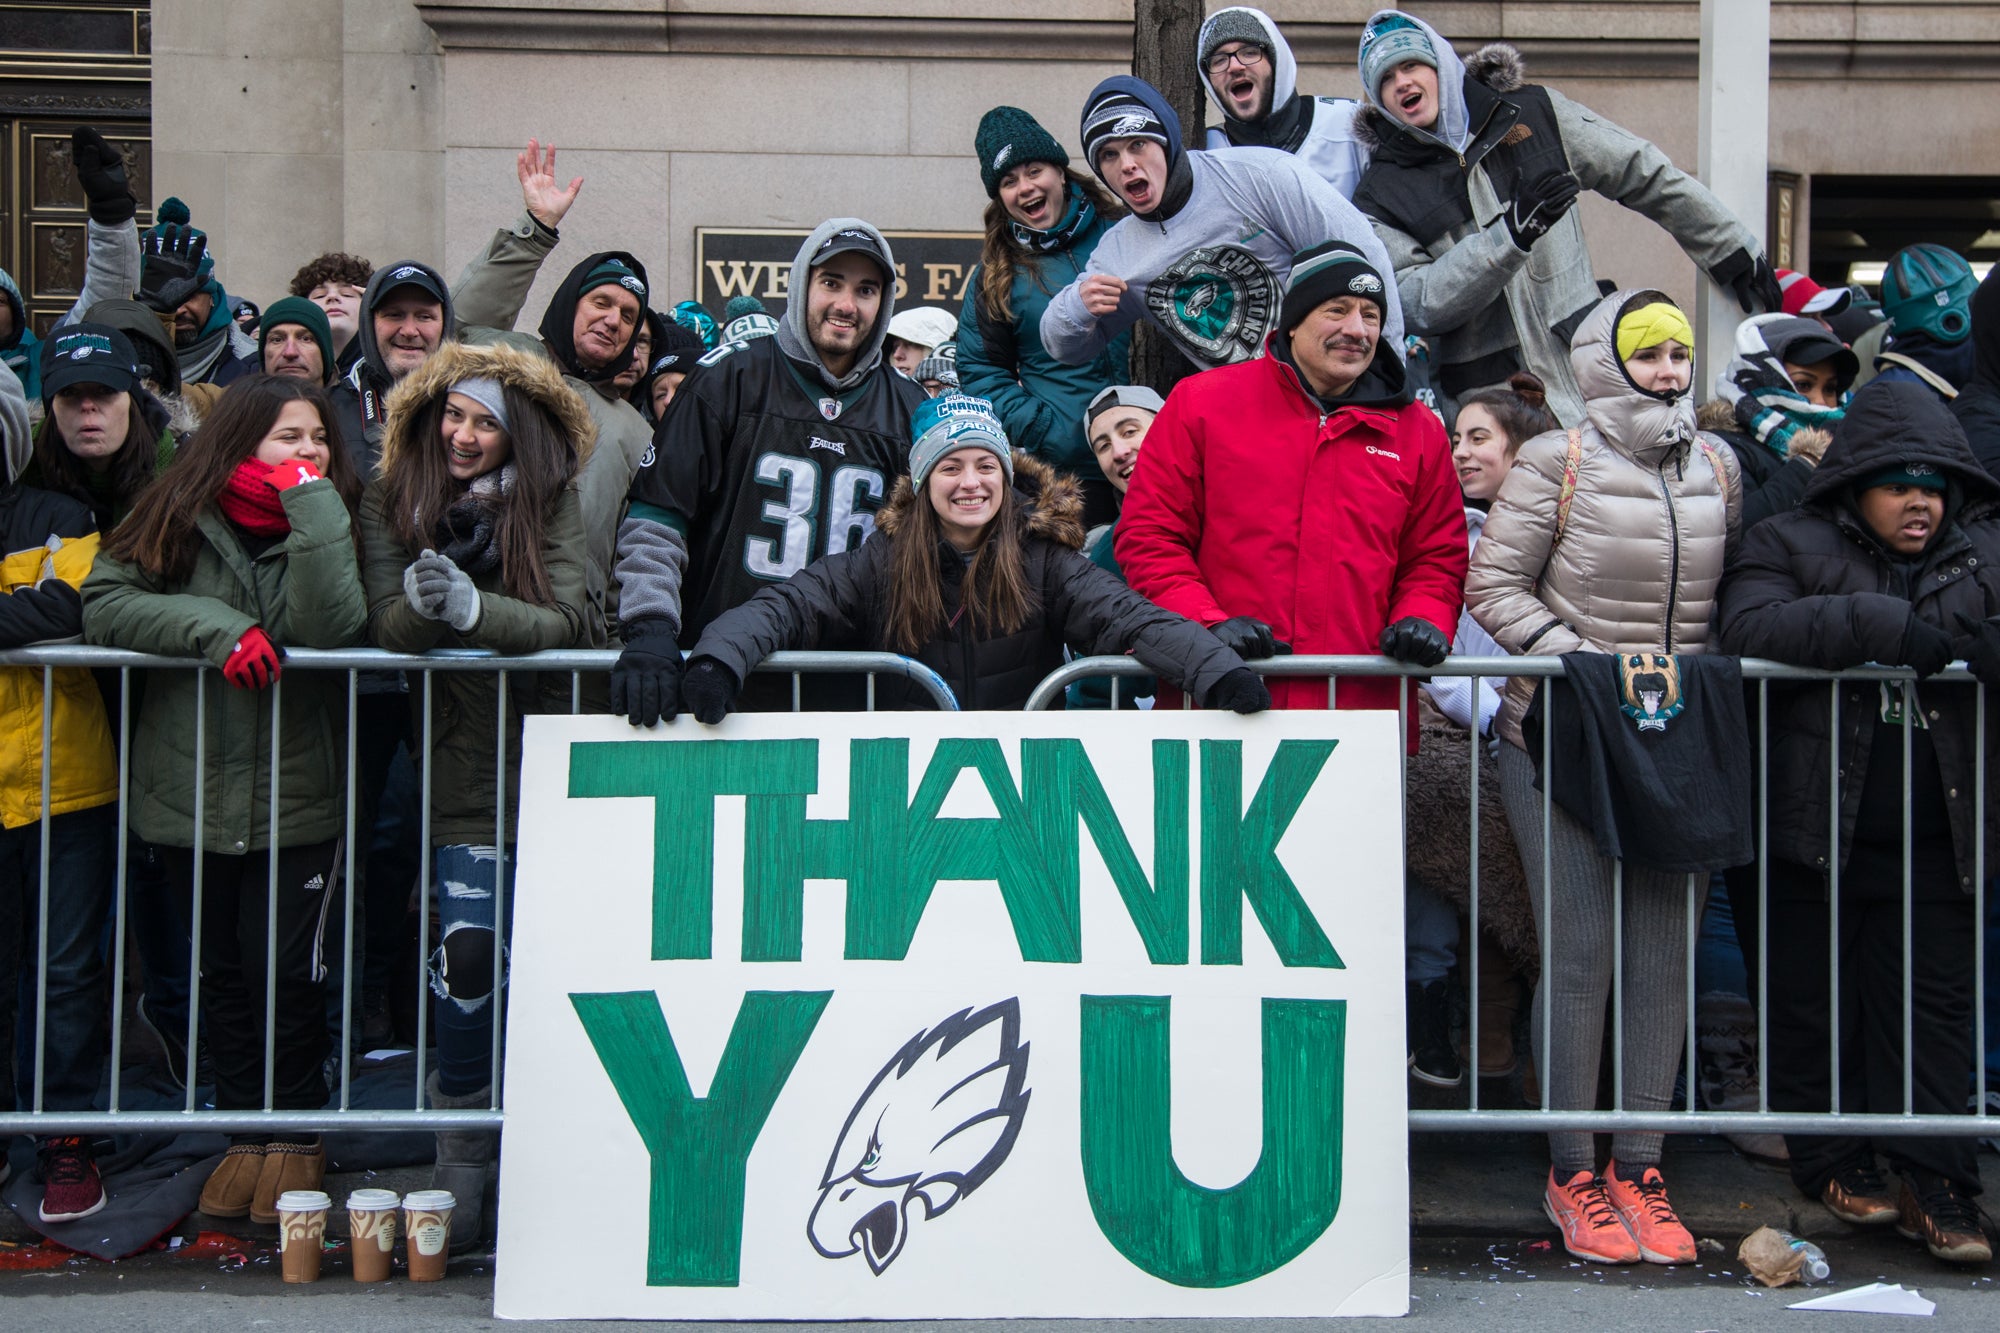 Eagles fans thank the players. Credit: Emily Cohen/WHYY